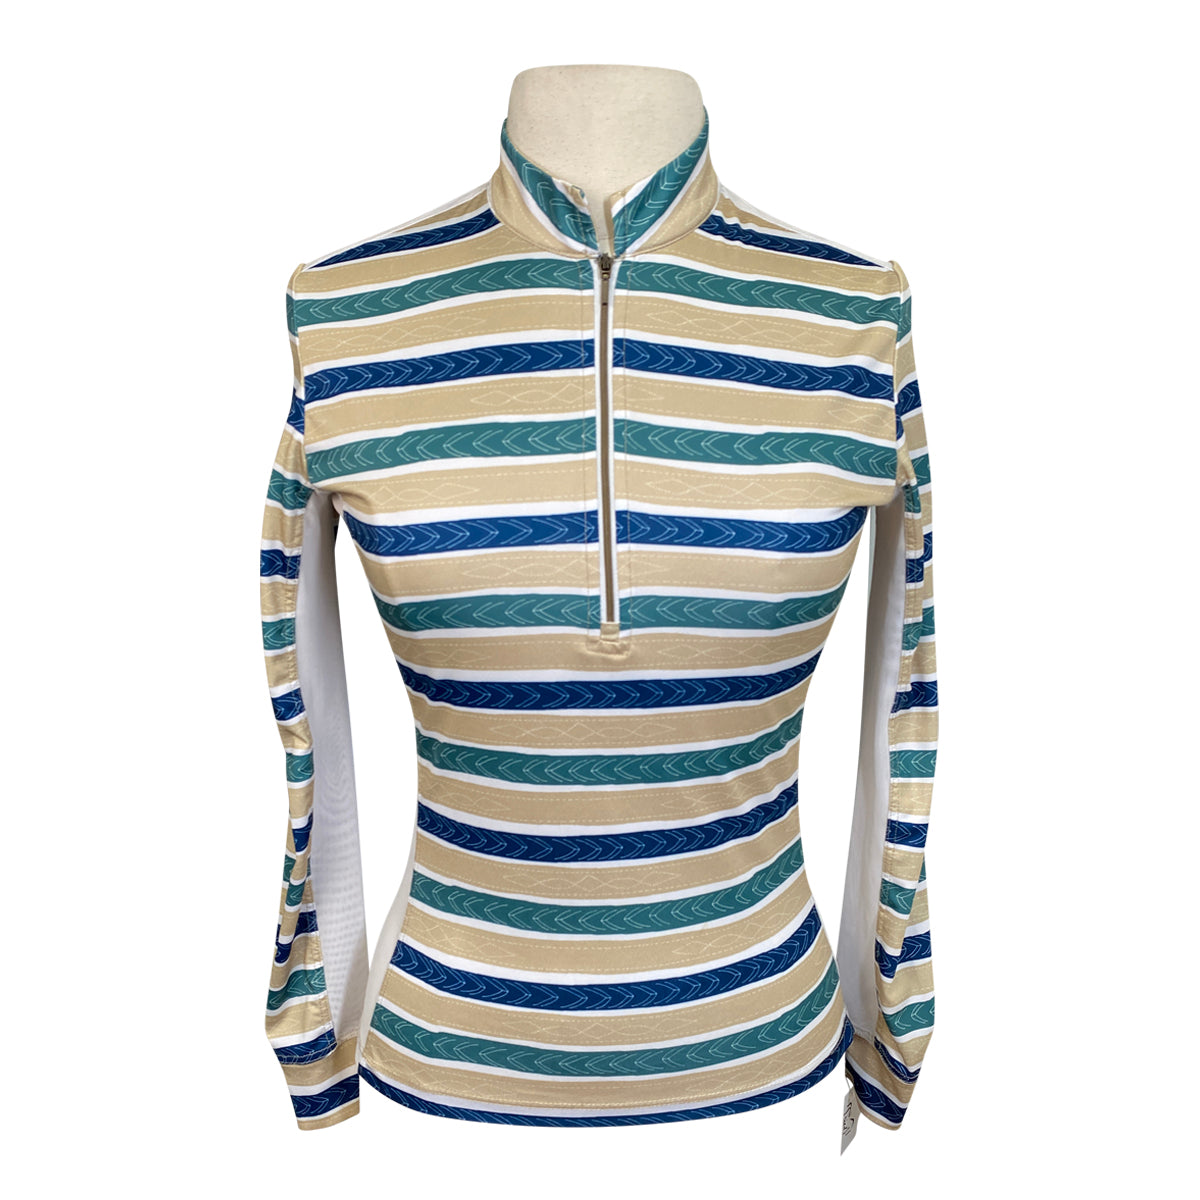 Cool Breeze Long Sleeve Sun Shirt in Blue/Teal/White